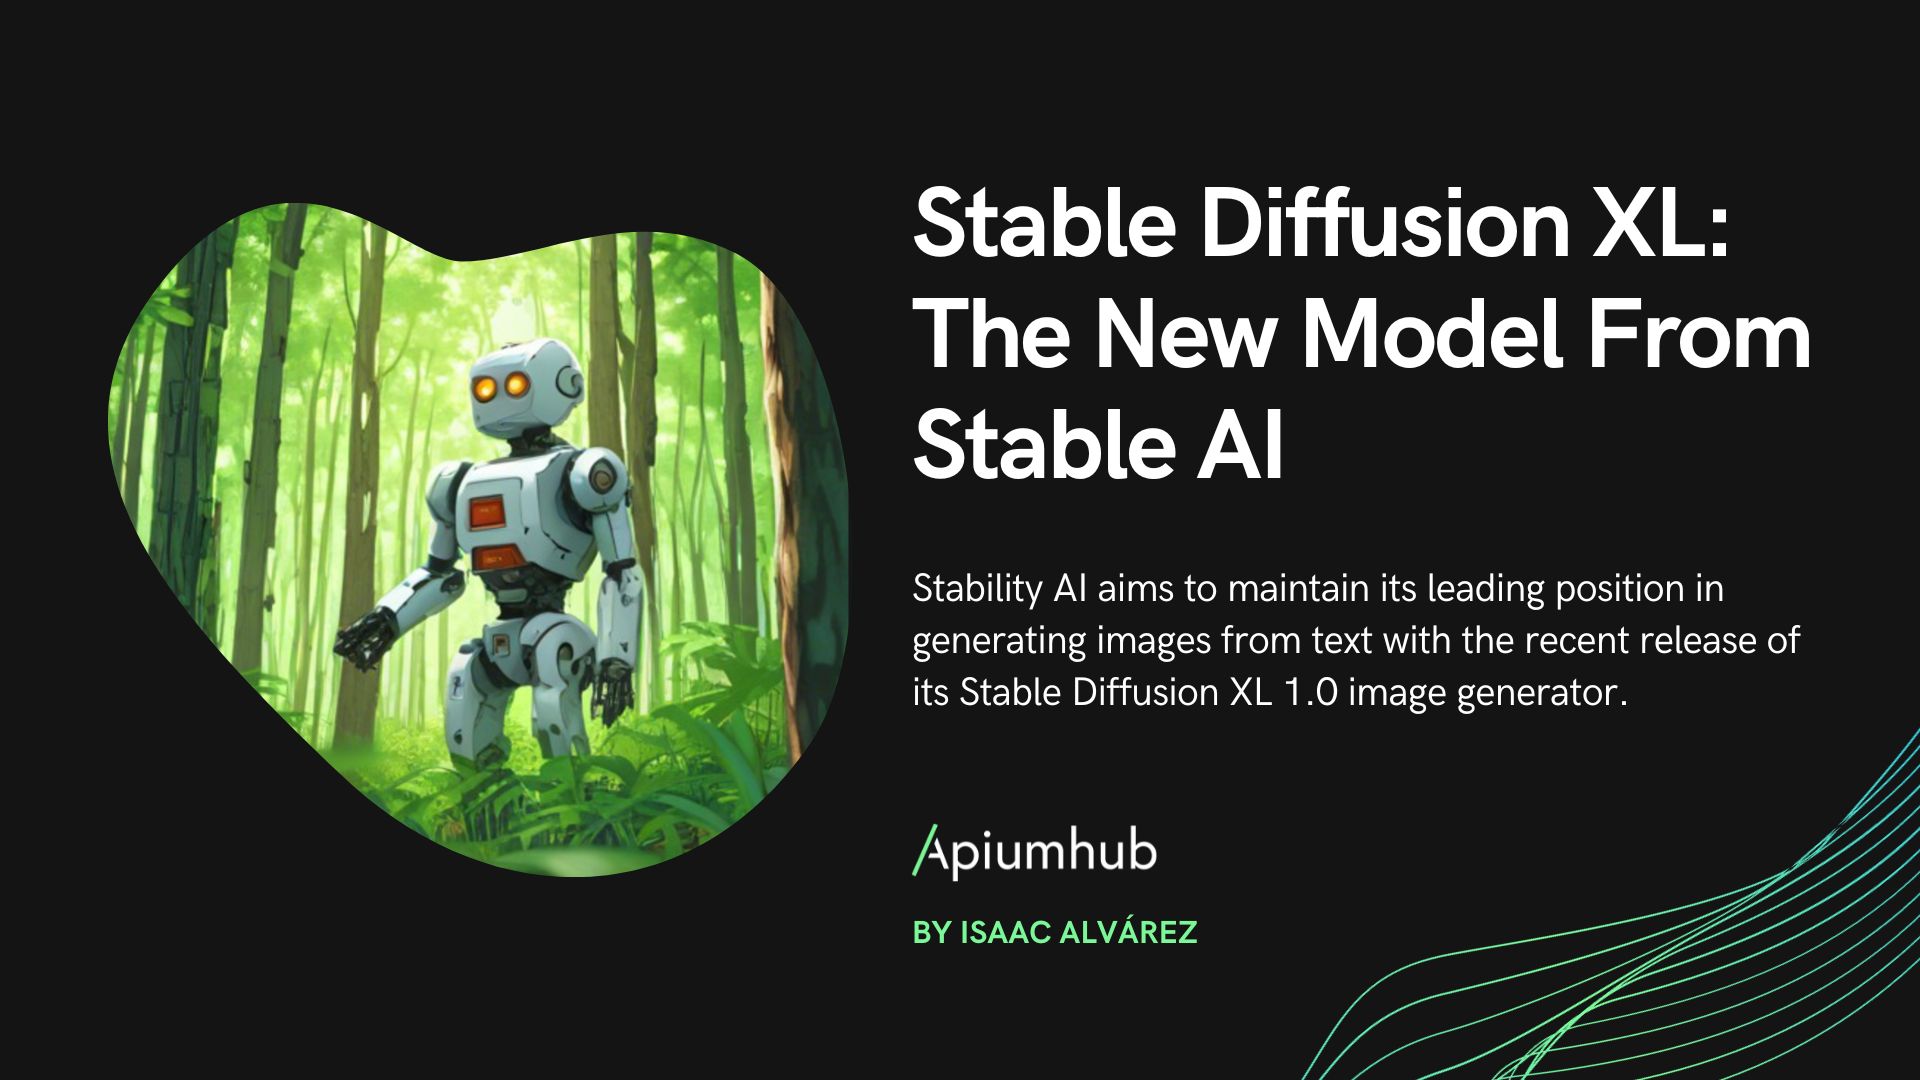 Stable Diffusion XL: The New Model From Stable AI